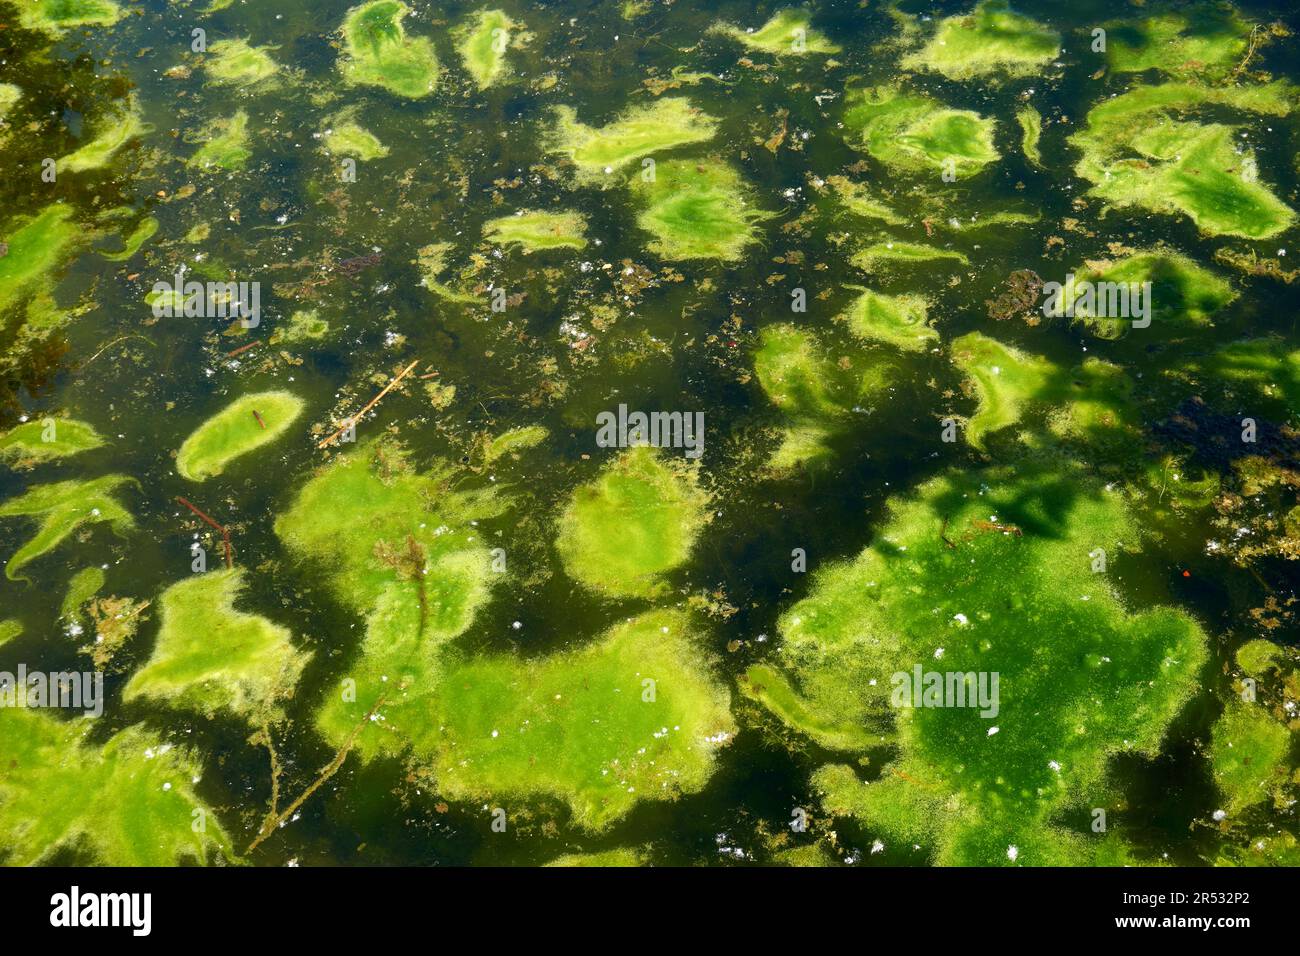 Bright green algae floating on the surface of a pond Stock Photo